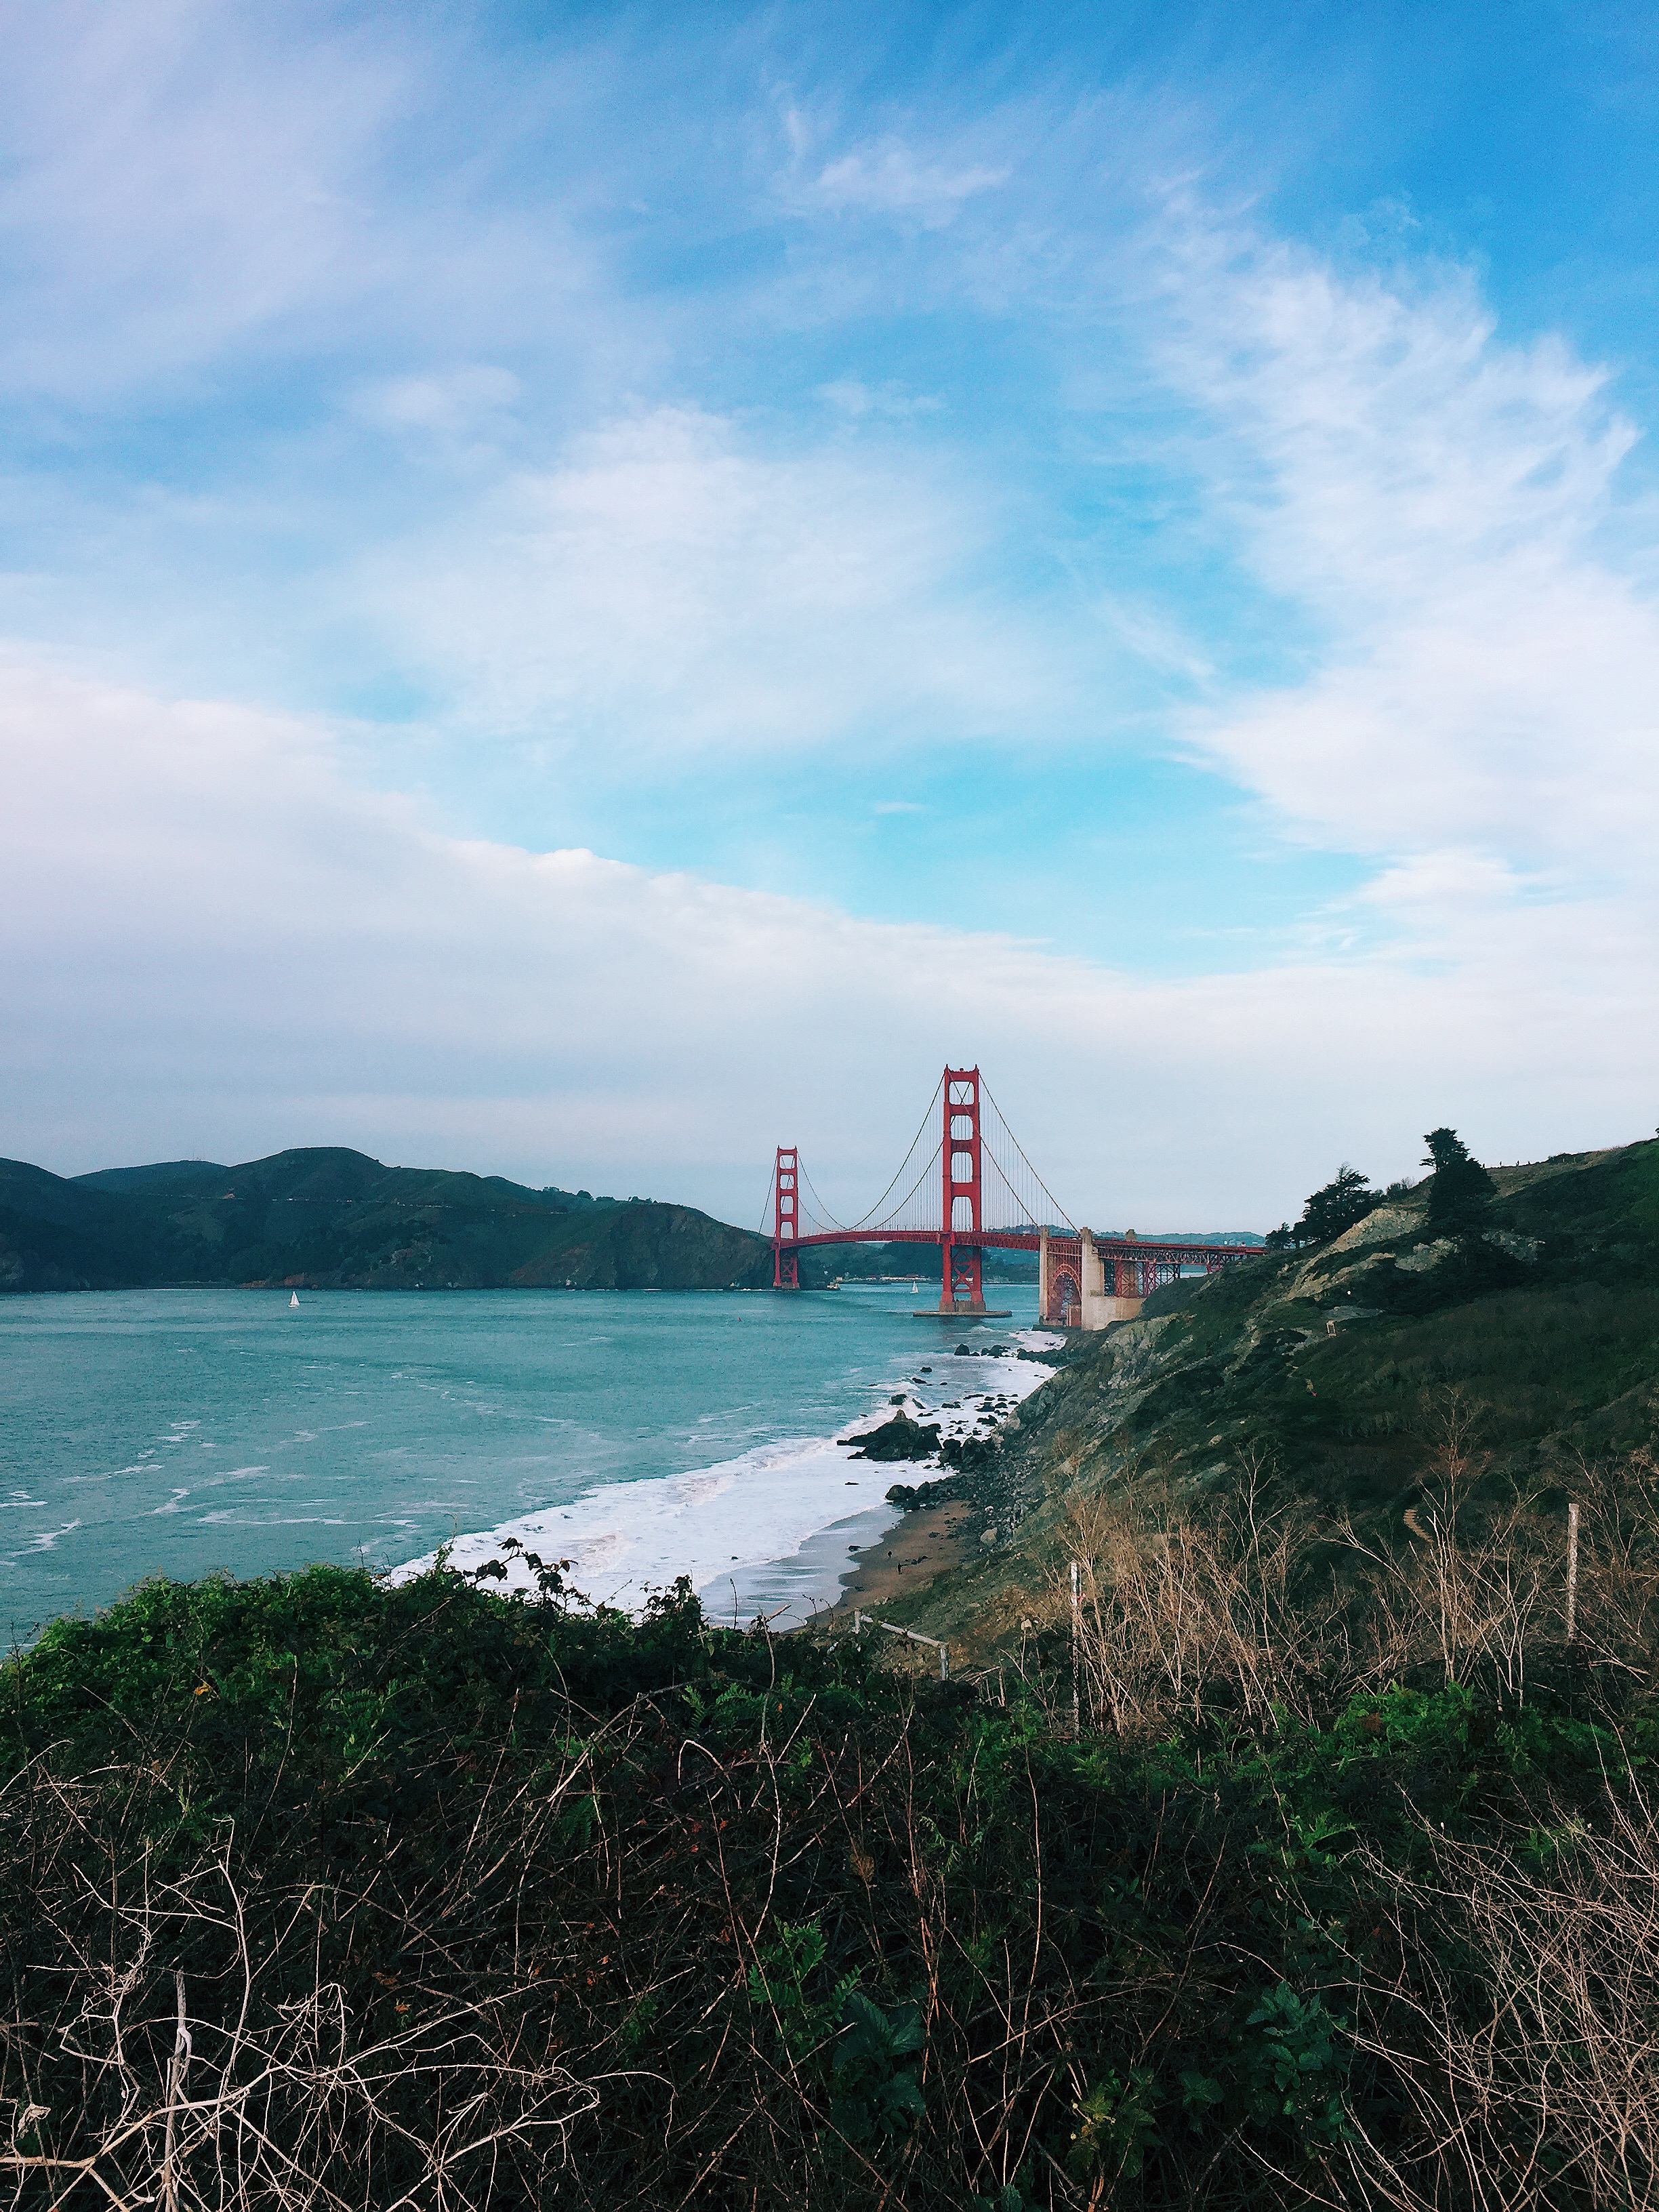 9 Must See San Francisco Spots For Visitors.